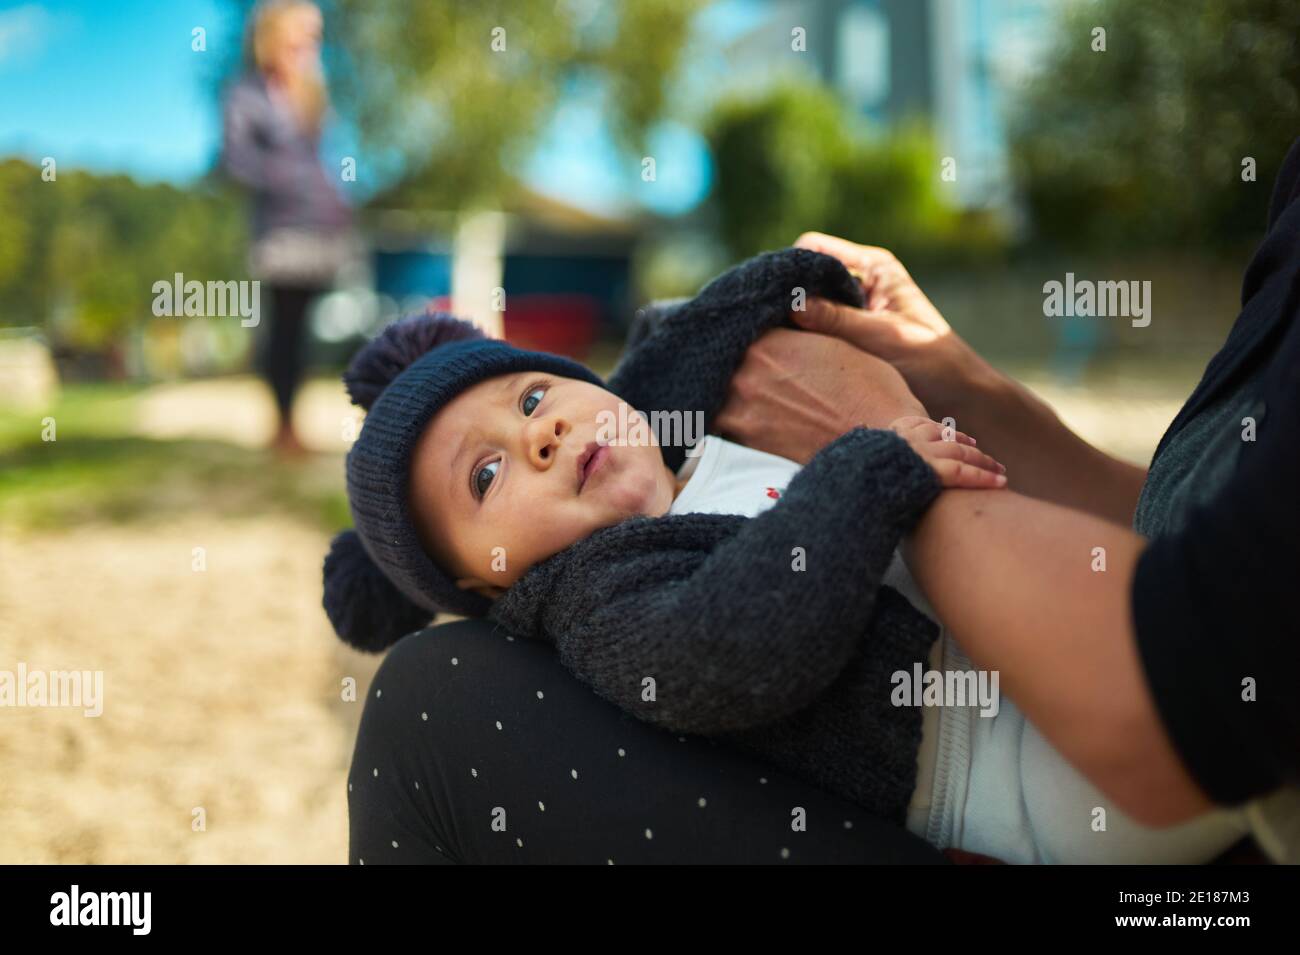 A little baby is resting in his mothers lap on a sunny autumn day in the park Stock Photo